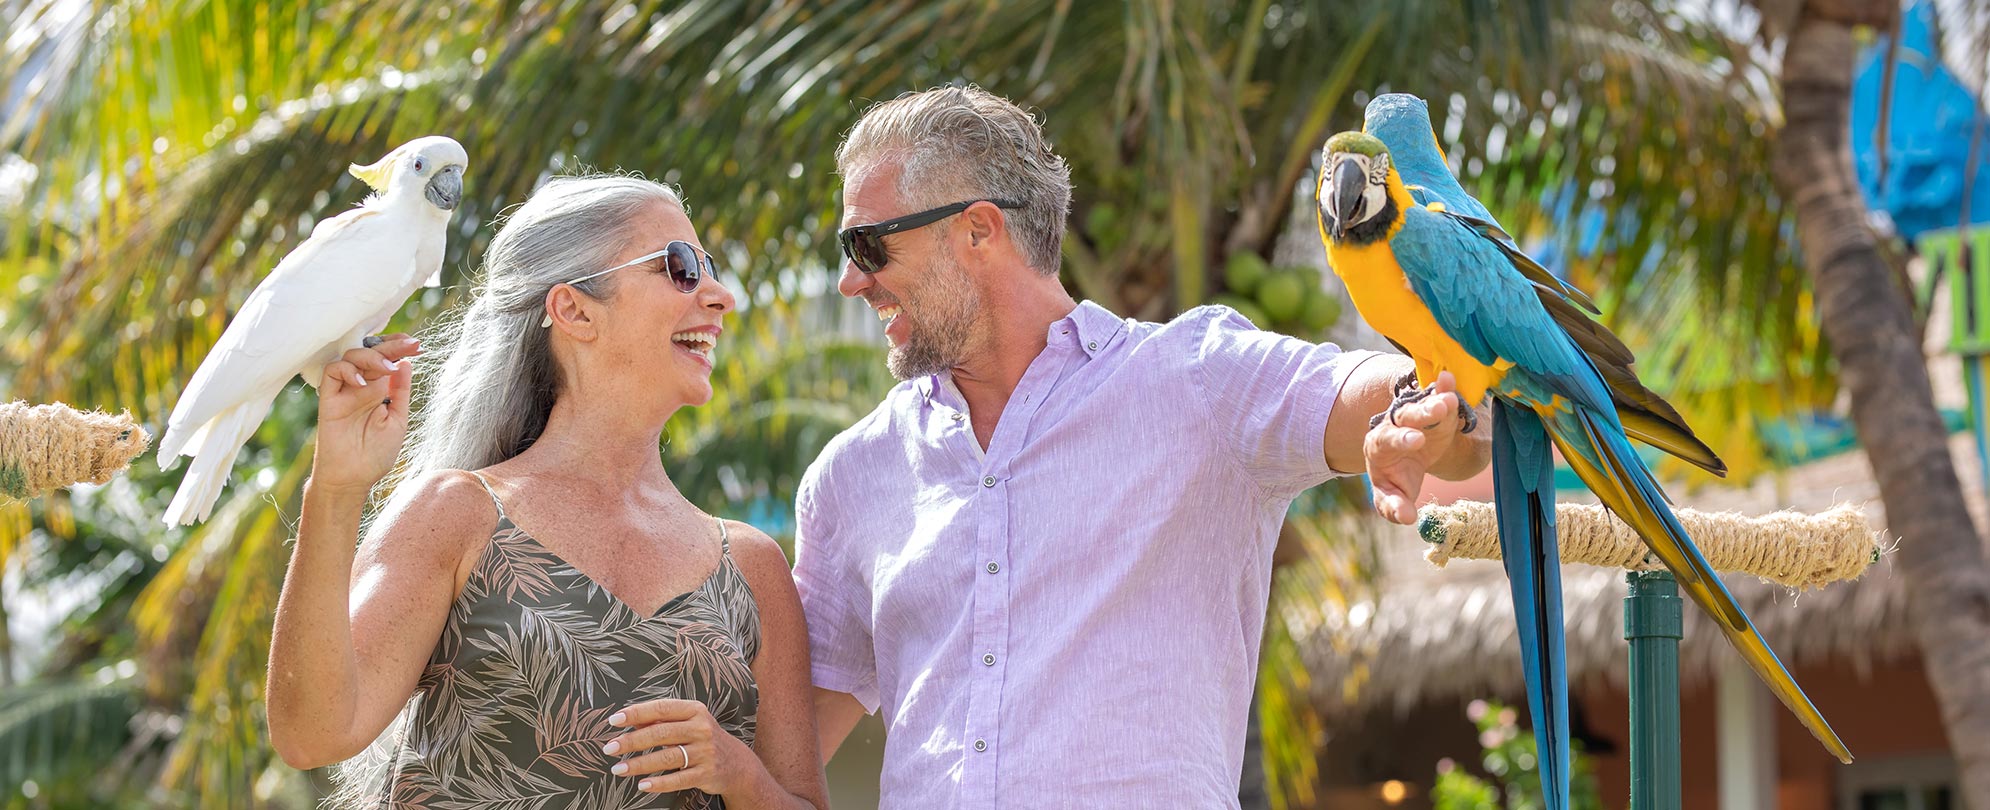 A man and woman hold tropical birds on their arms while enjoying owner exclusives from Margaritaville Vacation Club.